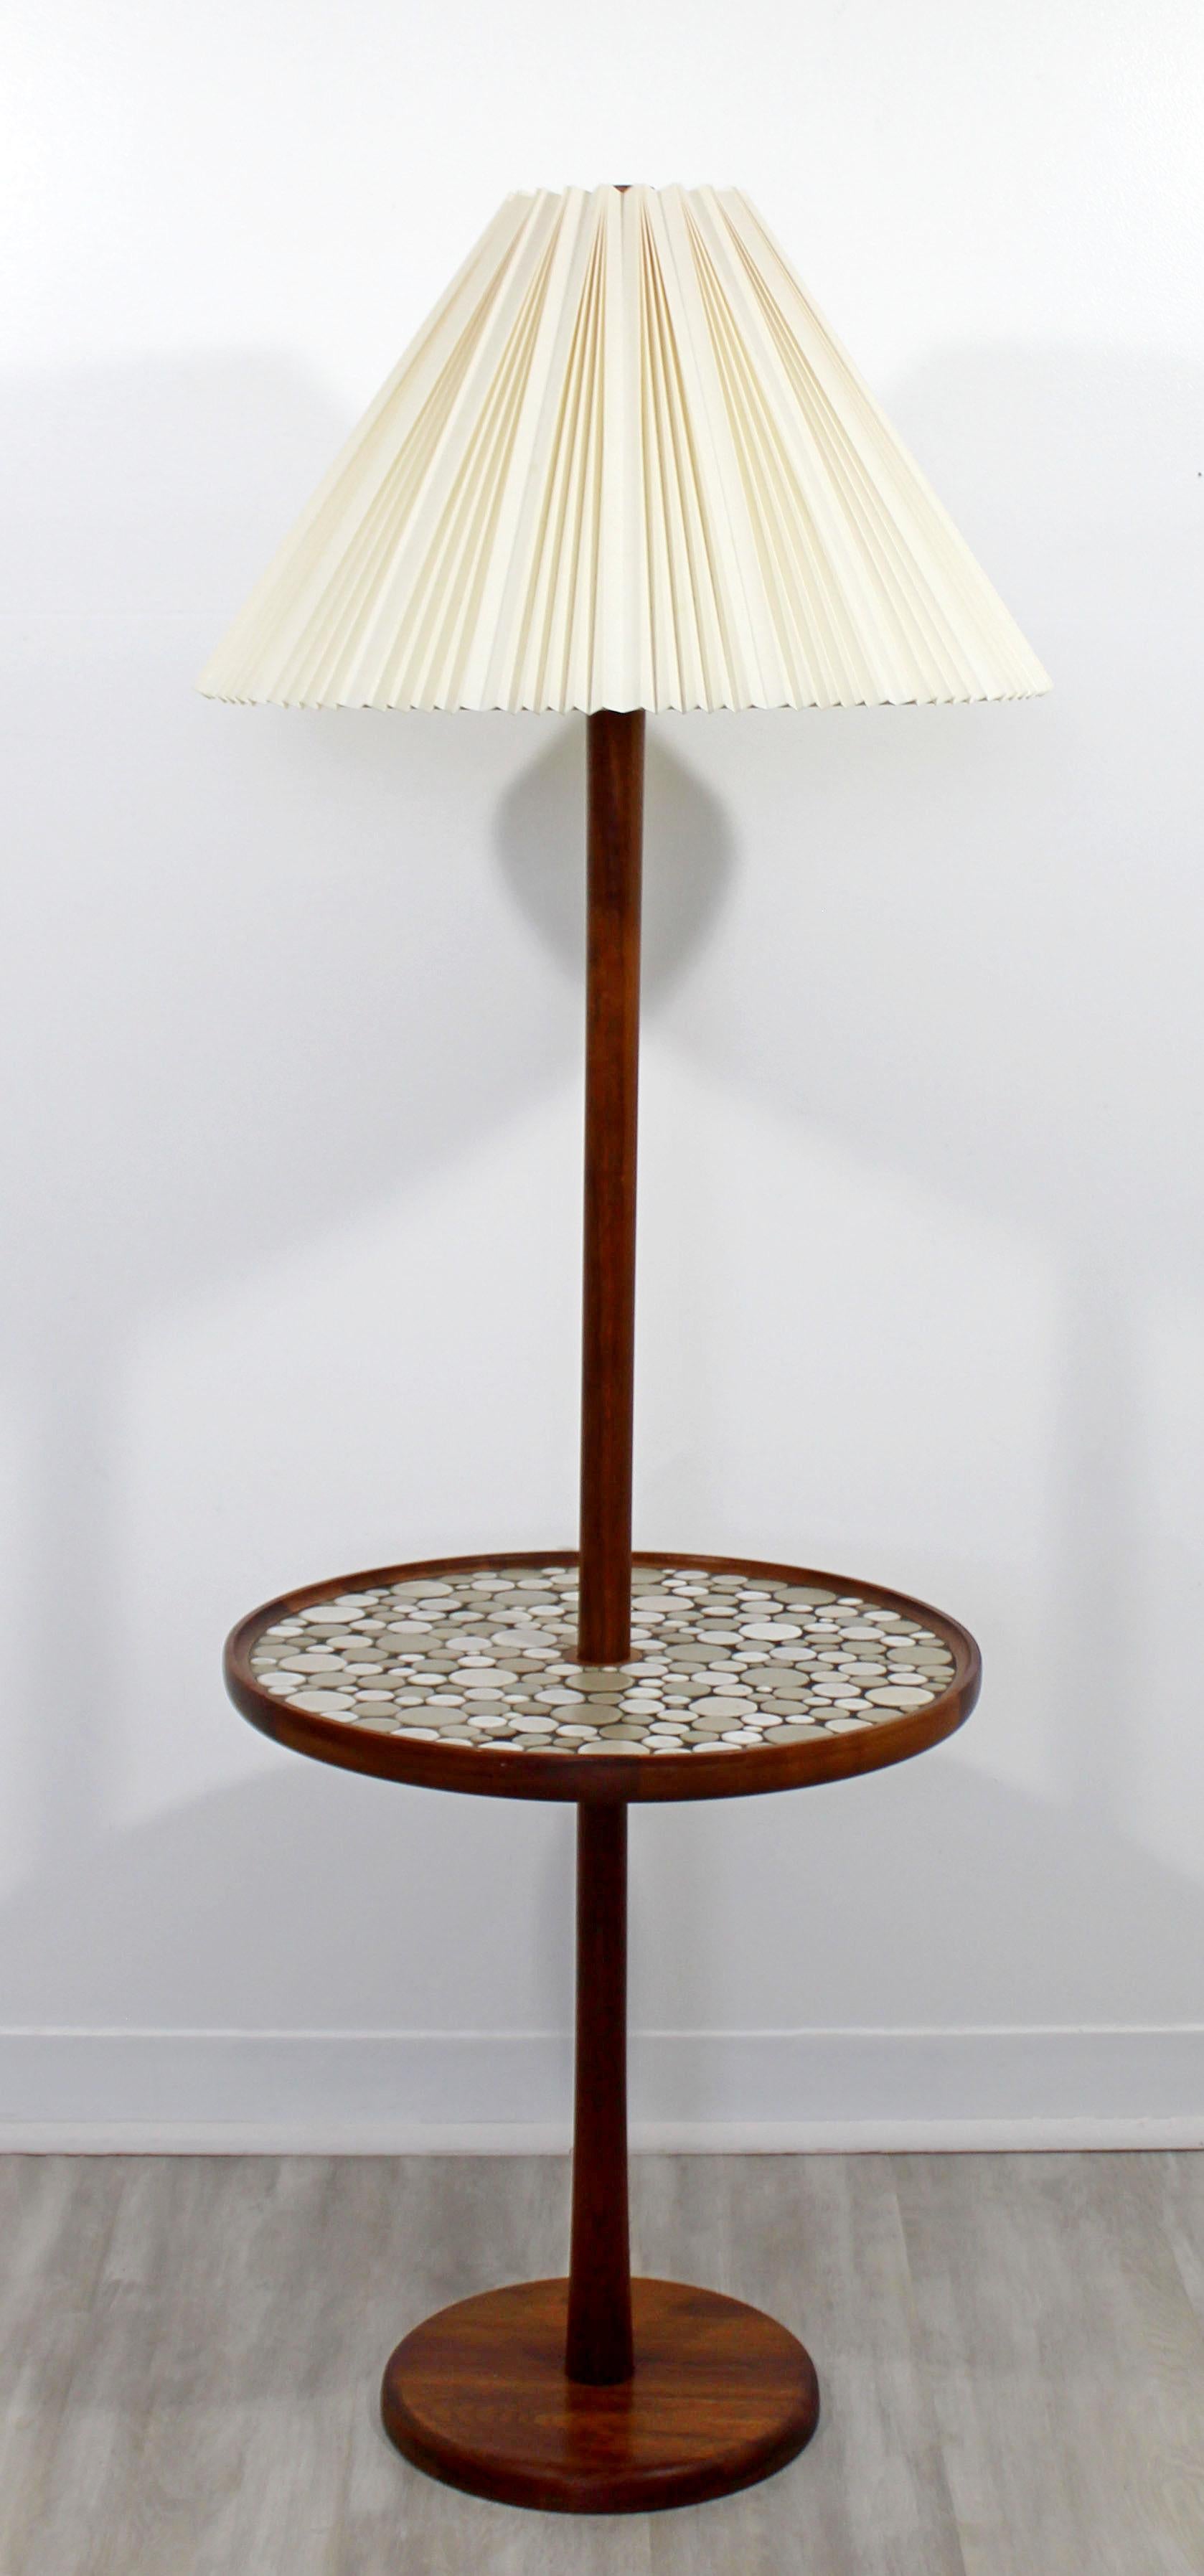 For your consideration is a magnificent, walnut wood floor lamp, with an attached tile table that's made of pottery circles, by Gordon & Jane Martz for Marshall Company. Original shade and wood finial. In excellent condition. The dimensions are 21